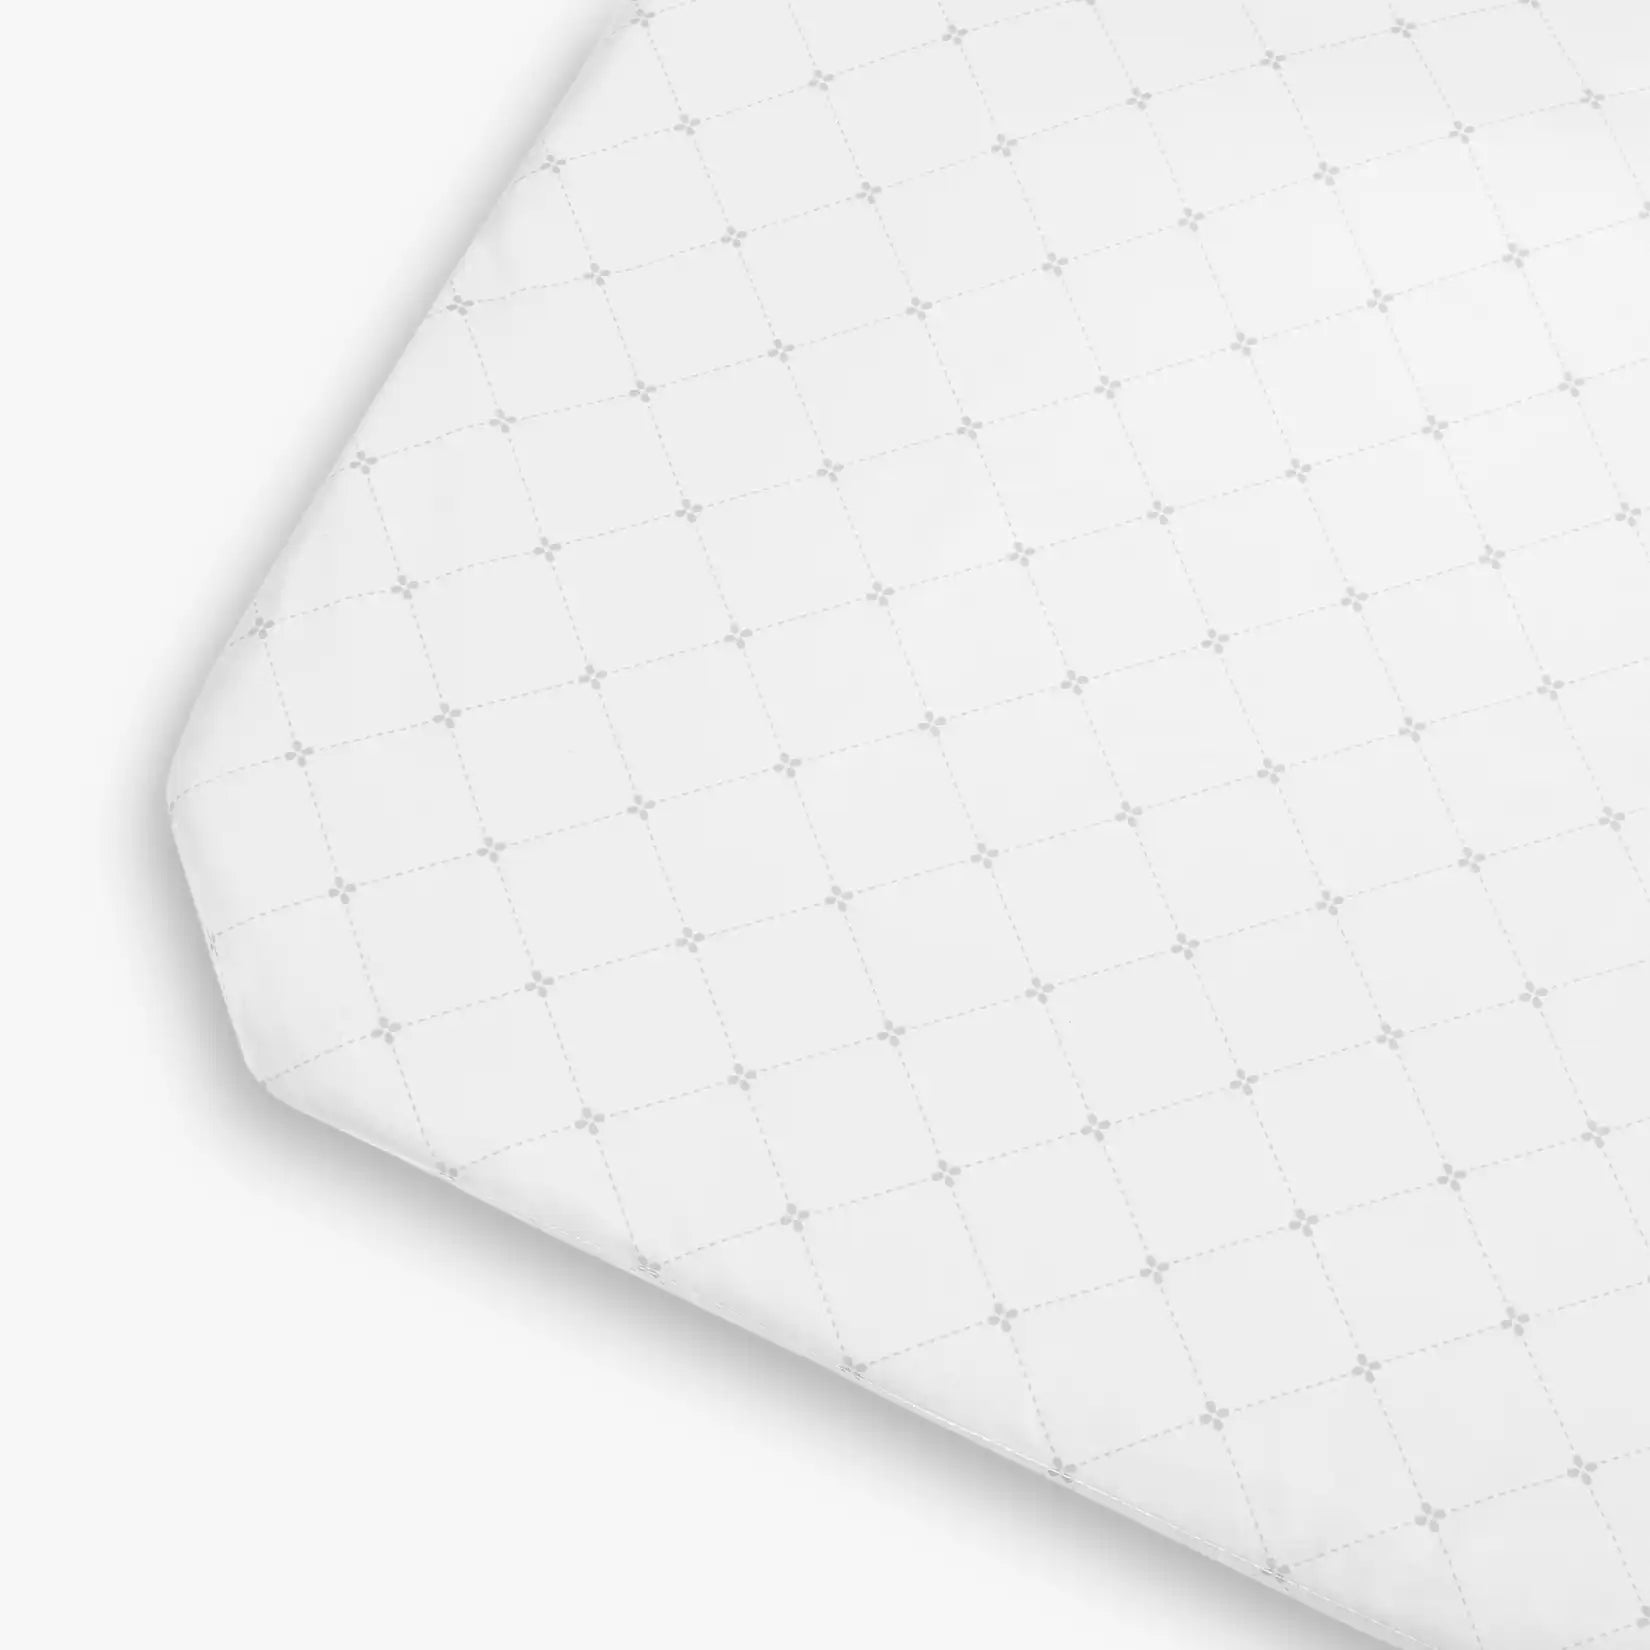 UPPAbaby Waterproof Mattress Cover for Remi